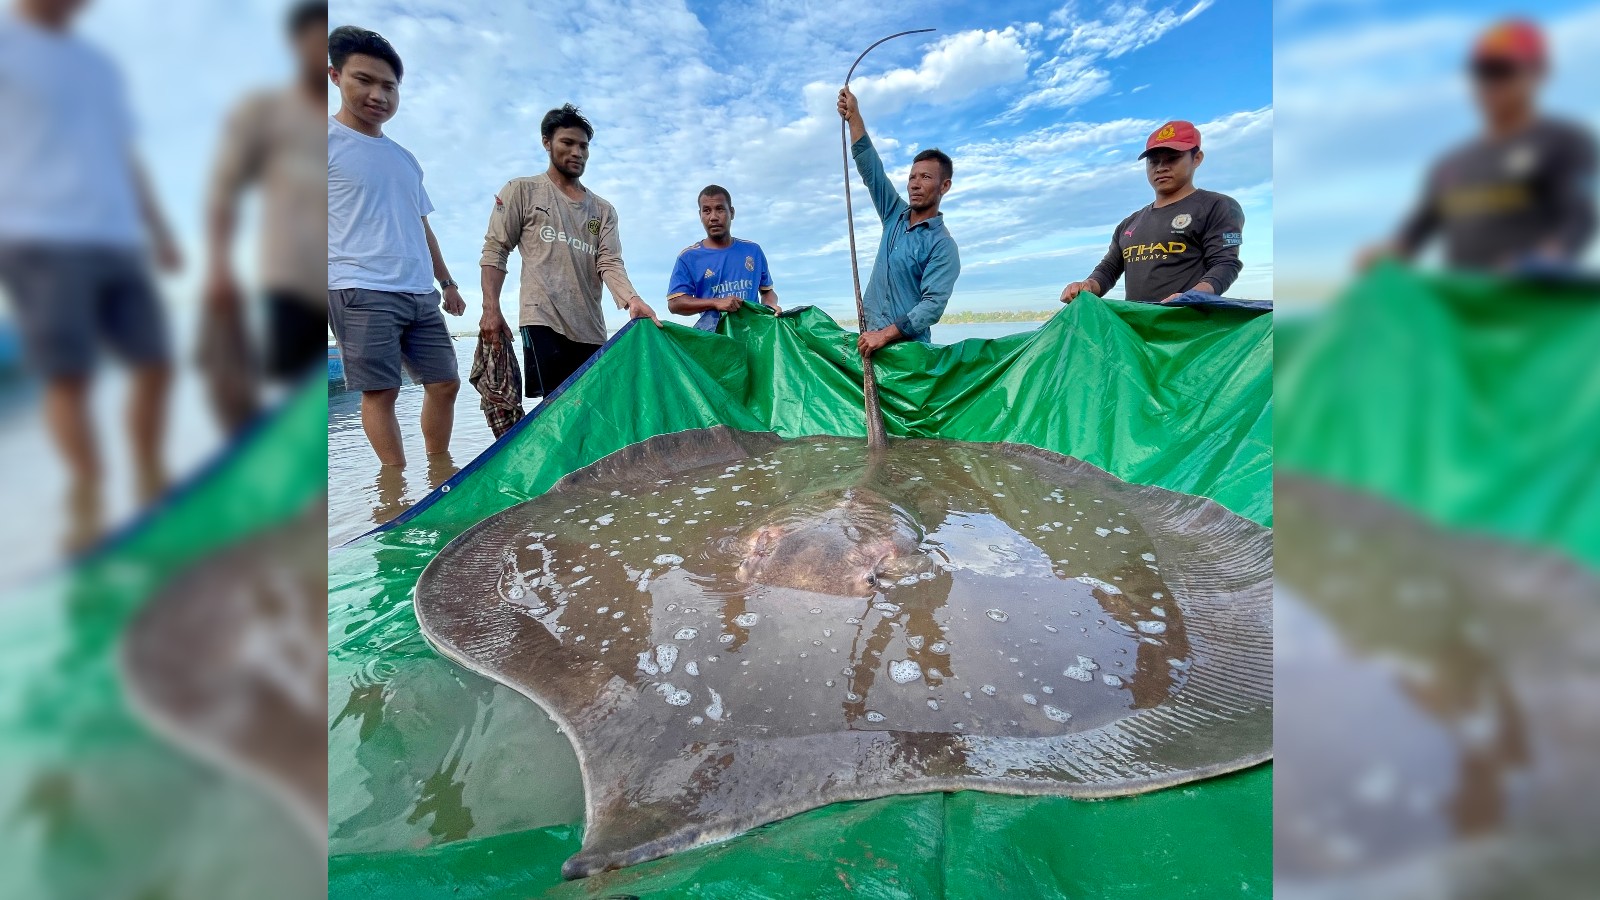 A 400 pound giant freshwater stingray in a net.